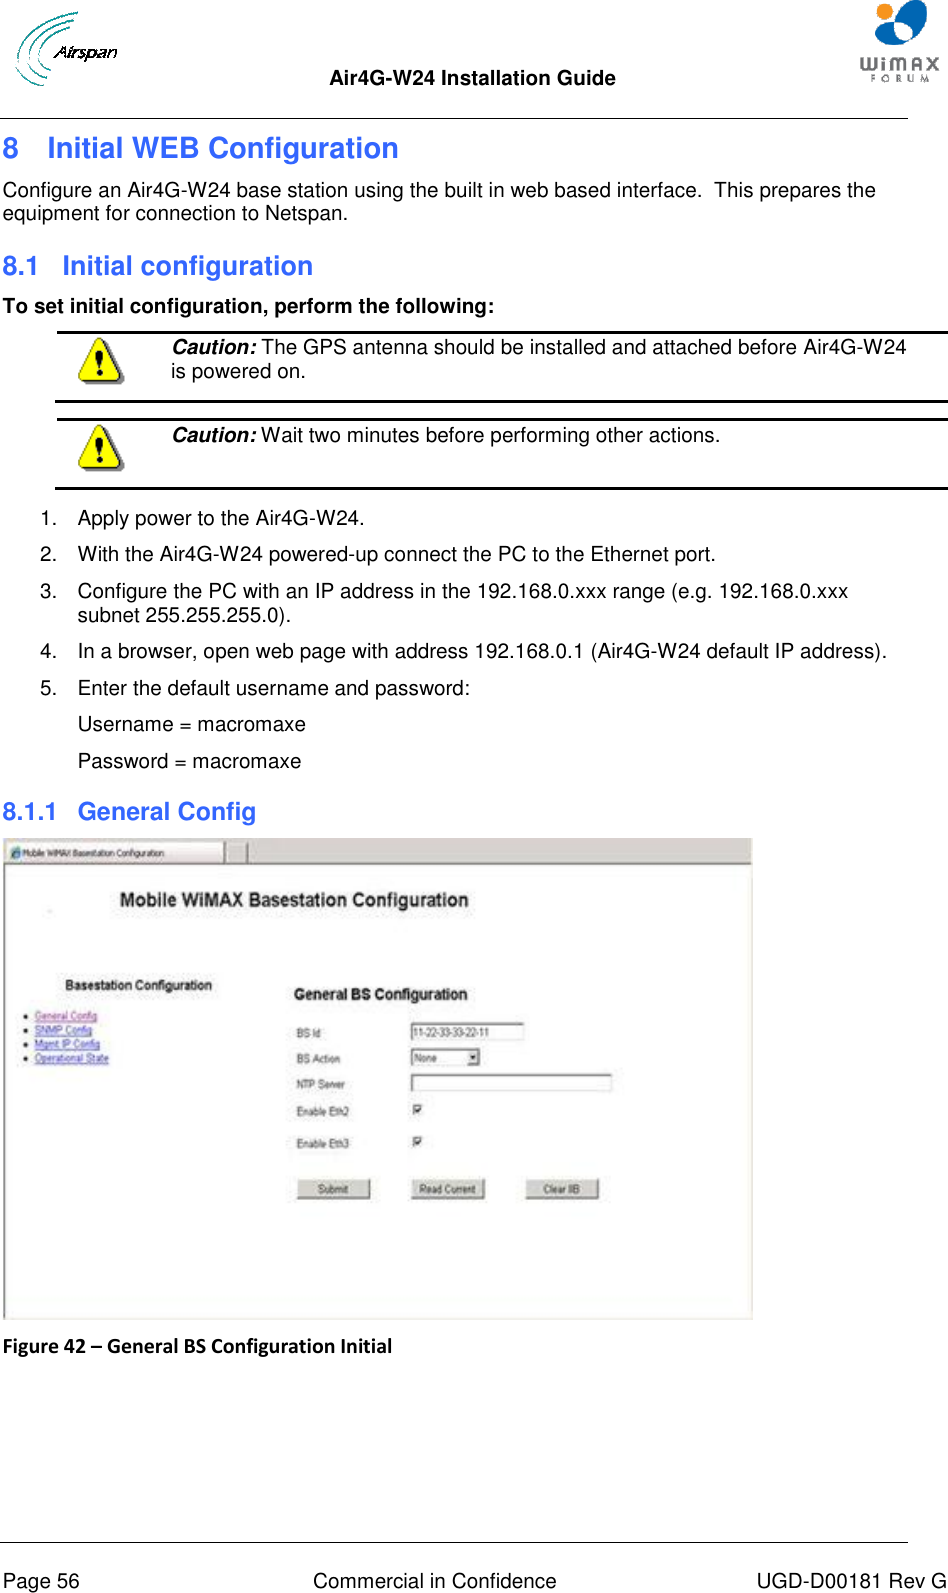  Air4G-W24 Installation Guide       Page 56  Commercial in Confidence  UGD-D00181 Rev G 8  Initial WEB Configuration Configure an Air4G-W24 base station using the built in web based interface.  This prepares the equipment for connection to Netspan. 8.1  Initial configuration To set initial configuration, perform the following:  Caution: The GPS antenna should be installed and attached before Air4G-W24 is powered on.   Caution: Wait two minutes before performing other actions.  1.  Apply power to the Air4G-W24. 2.  With the Air4G-W24 powered-up connect the PC to the Ethernet port. 3.  Configure the PC with an IP address in the 192.168.0.xxx range (e.g. 192.168.0.xxx subnet 255.255.255.0). 4.  In a browser, open web page with address 192.168.0.1 (Air4G-W24 default IP address). 5.  Enter the default username and password: Username = macromaxe Password = macromaxe 8.1.1  General Config  Figure 42 – General BS Configuration Initial  